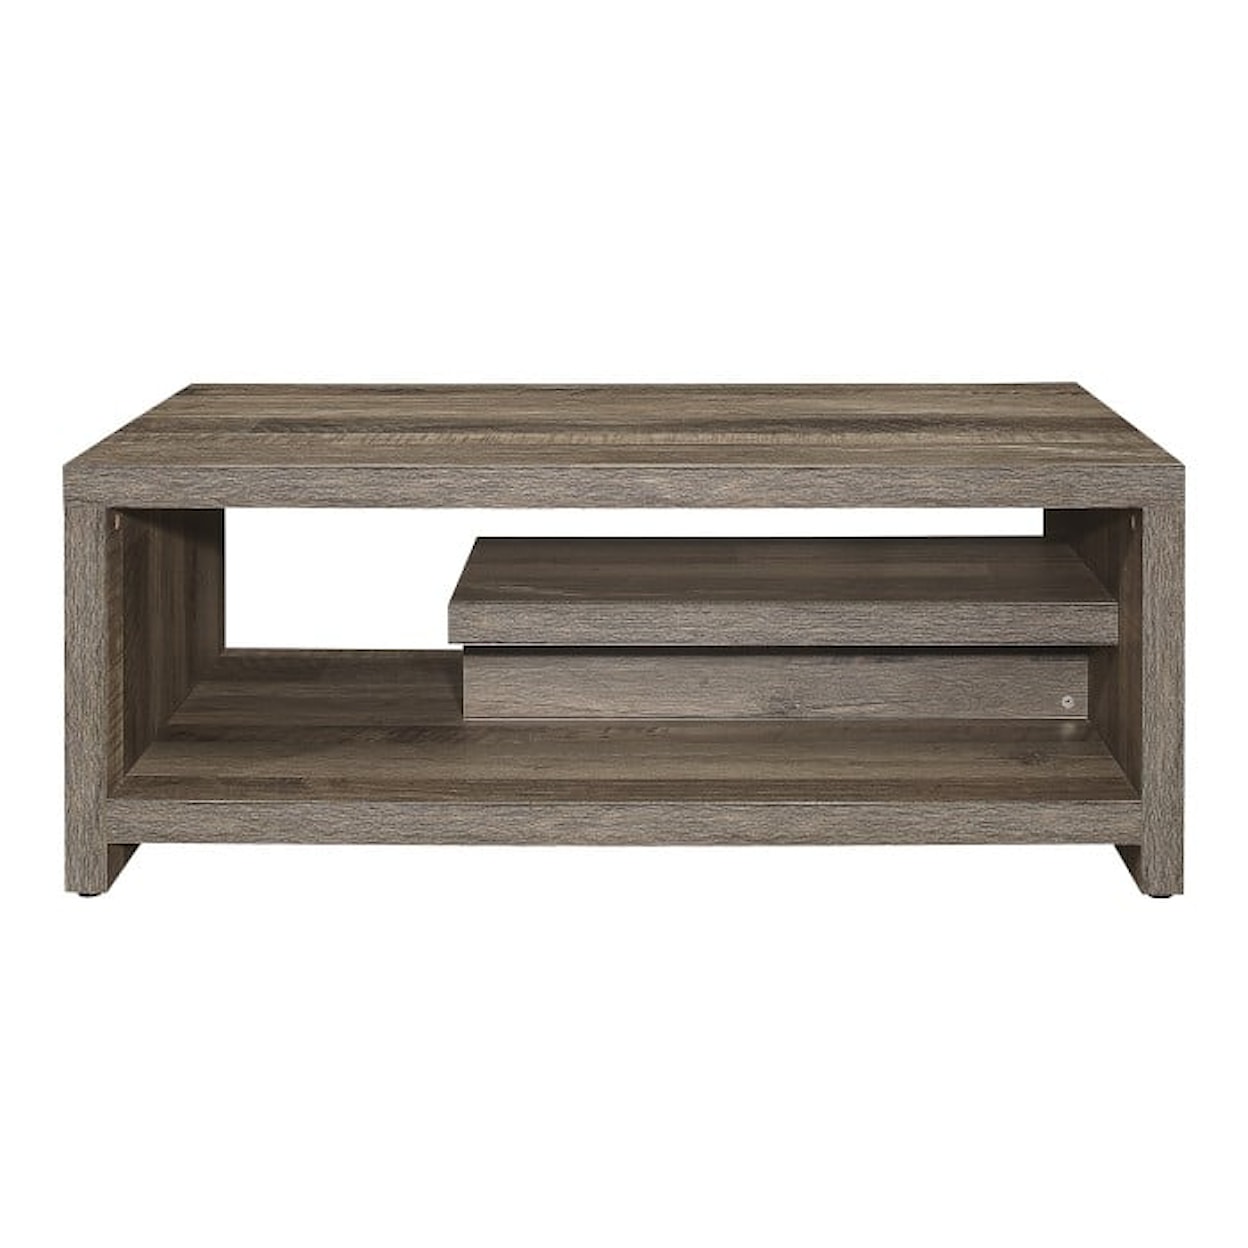 Homelegance Furniture Danio Contemporary Cocktail Table